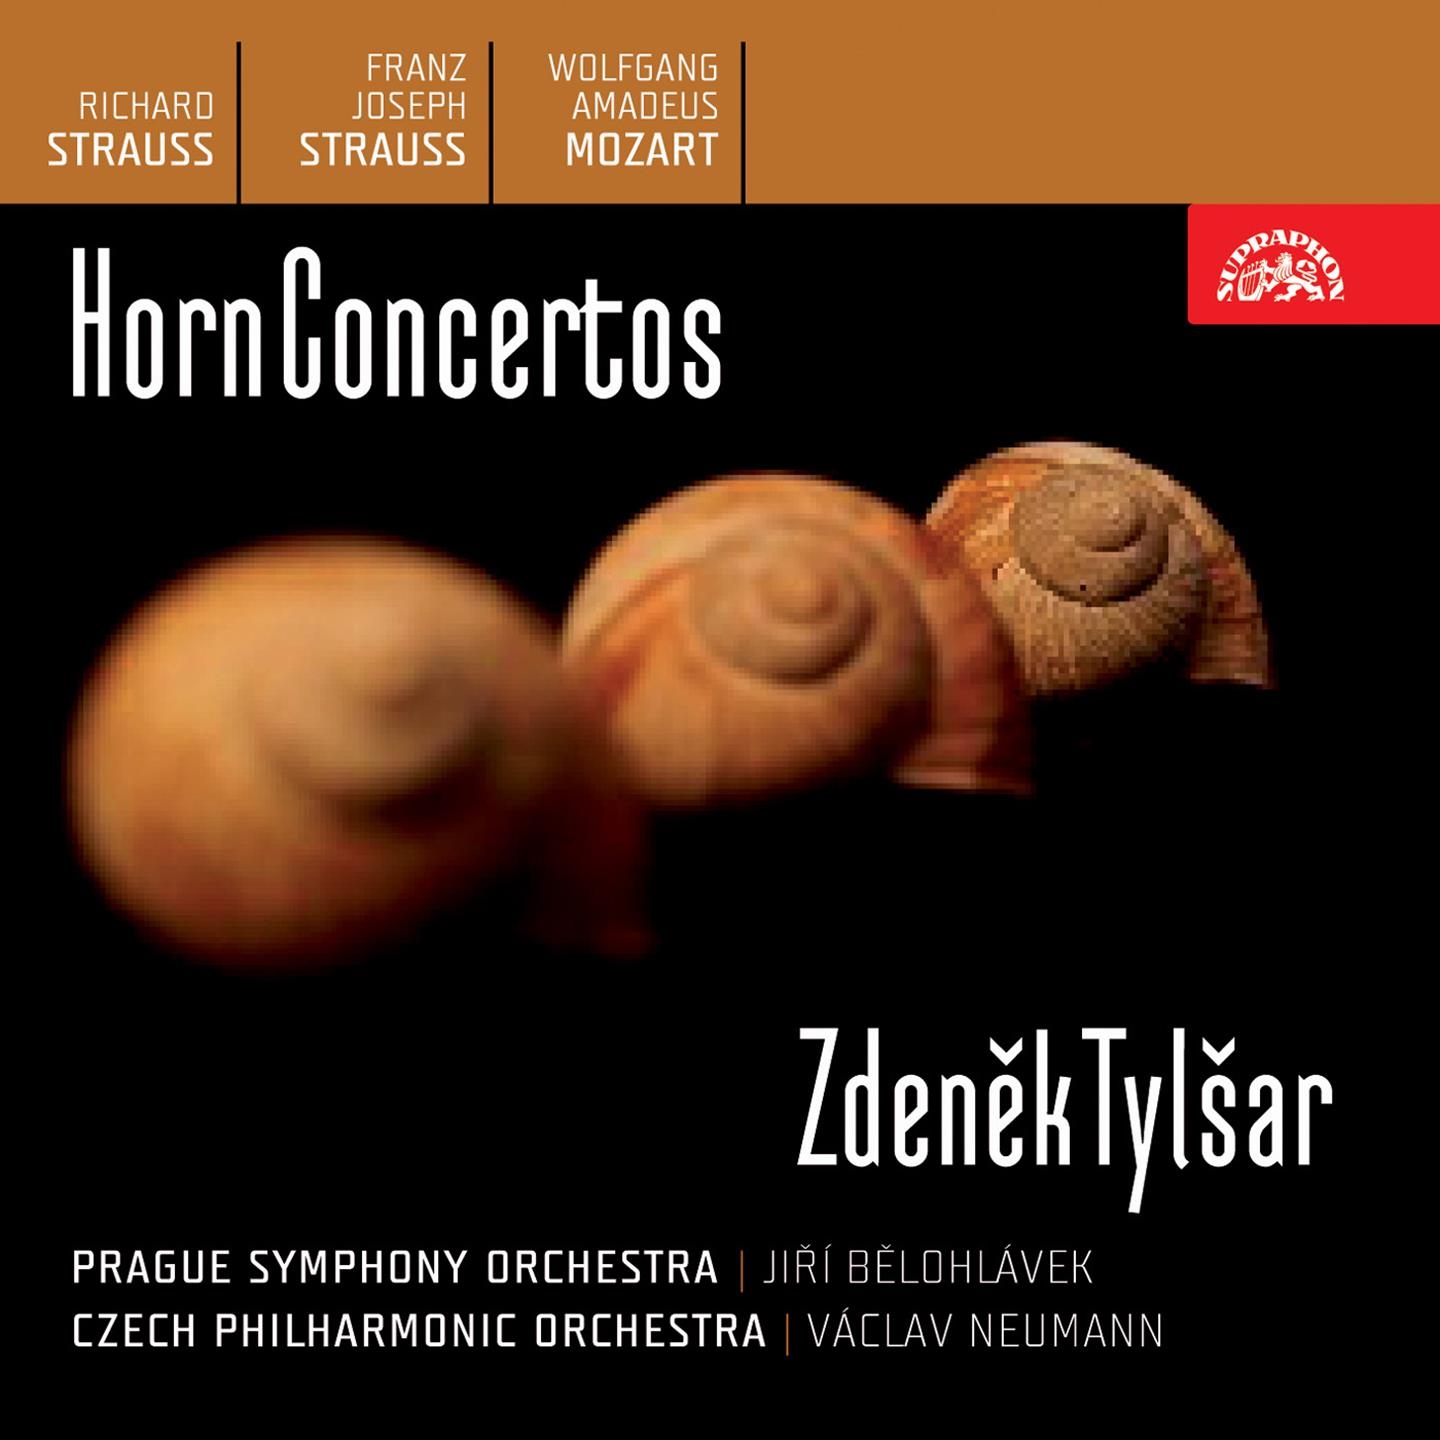 Concerto for French Horn and Orchestra No. 1 in E-Flat Major, Op. 11, .: I. Allegro /att./